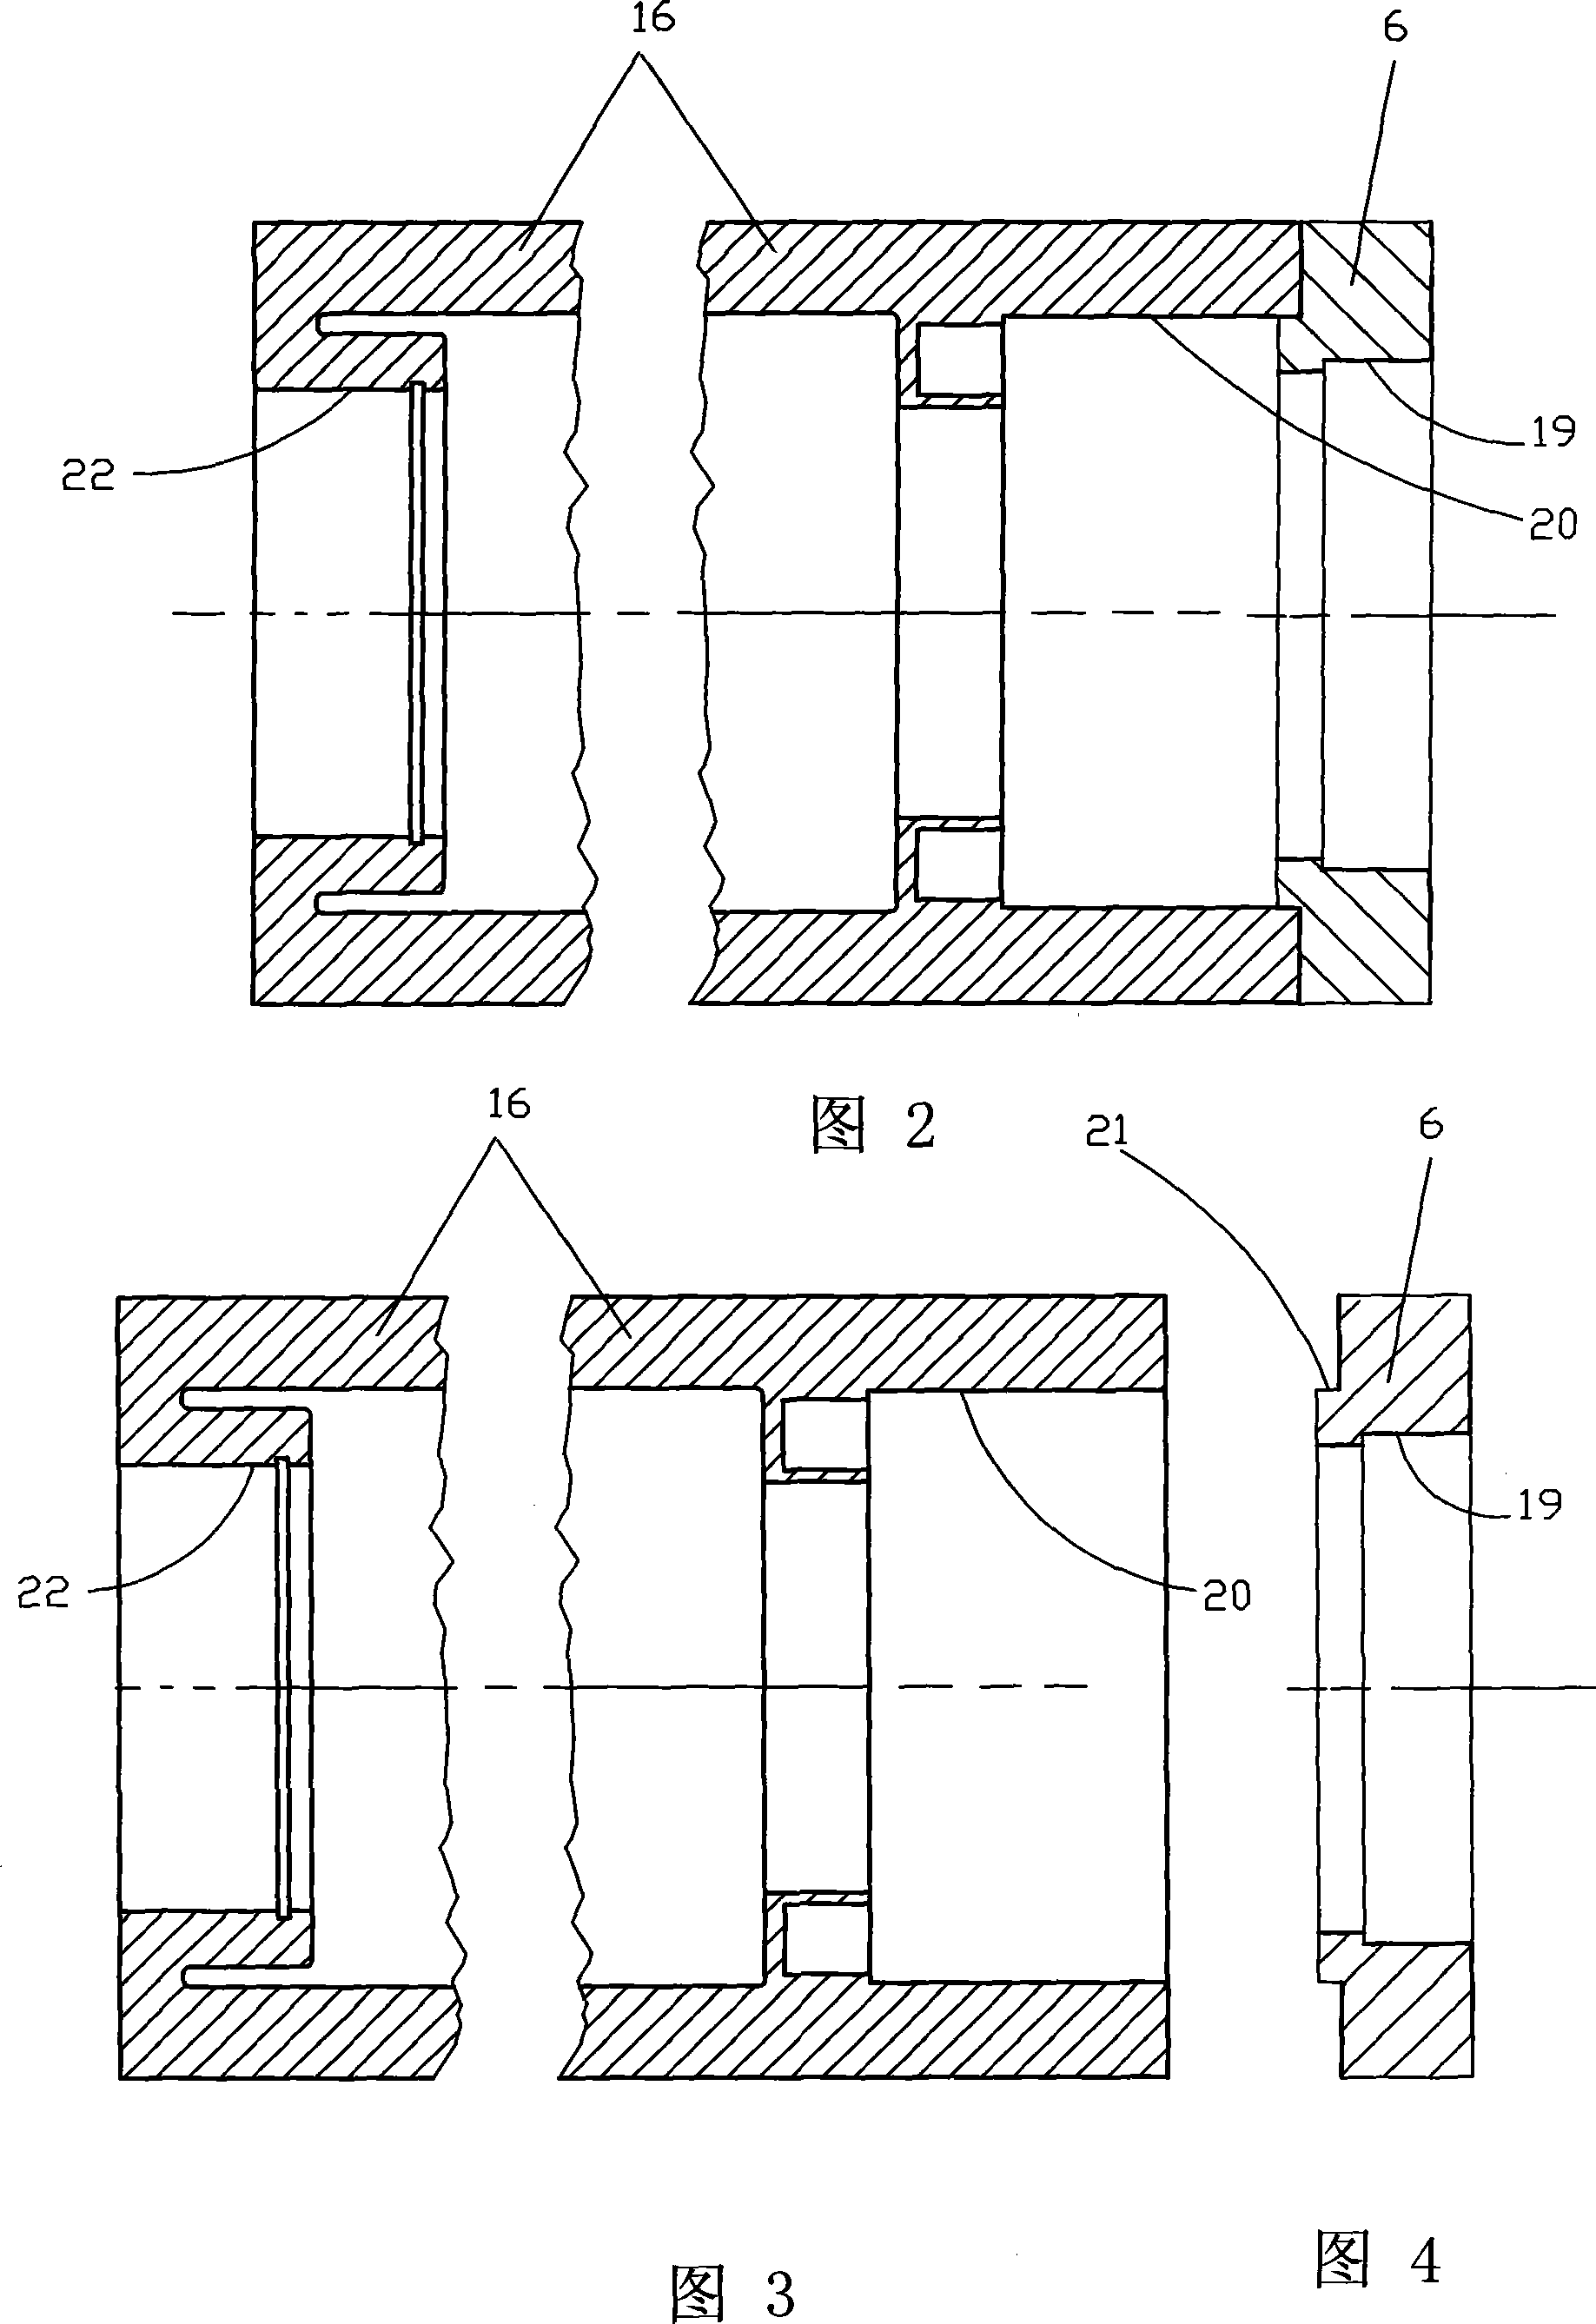 Process for improving the accuracy of manufacturing of precision boring head